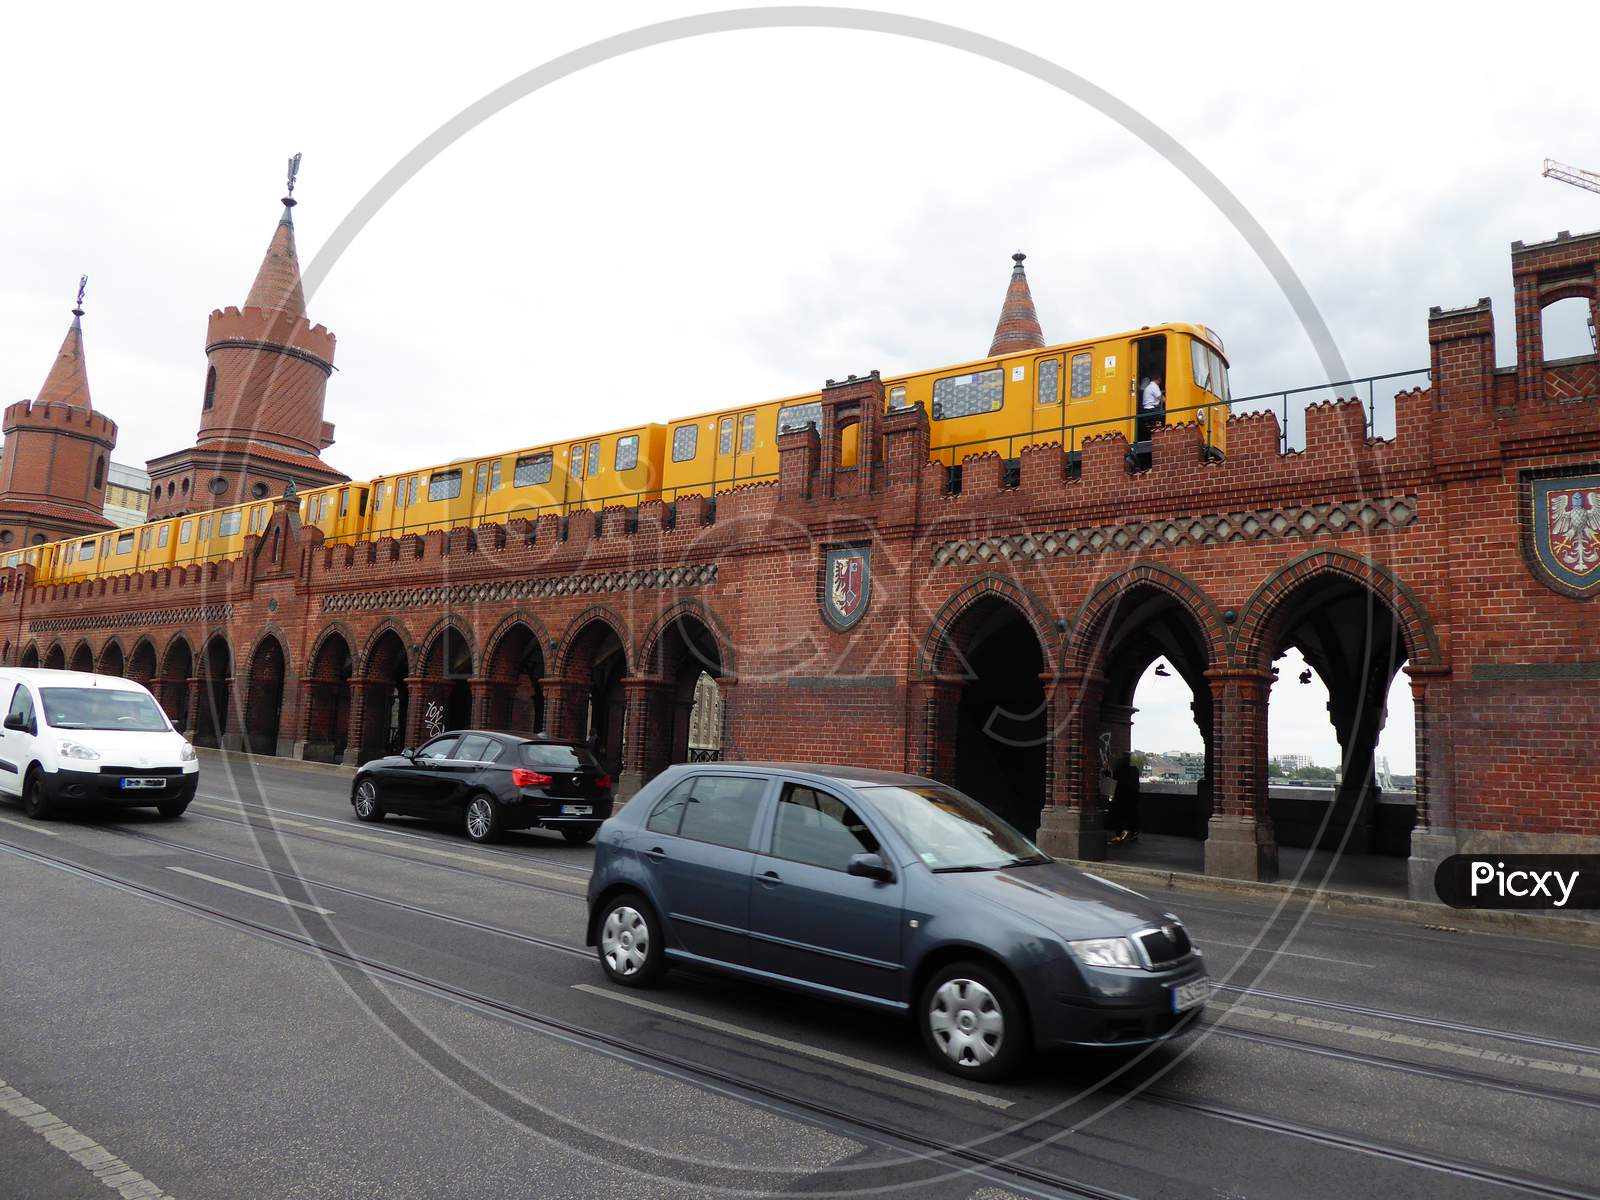 The Oberbaum Bridge Is A Double-Deck Bridge Crossing Berlin'S River Spree, Considered One Of The City'S Landmarks